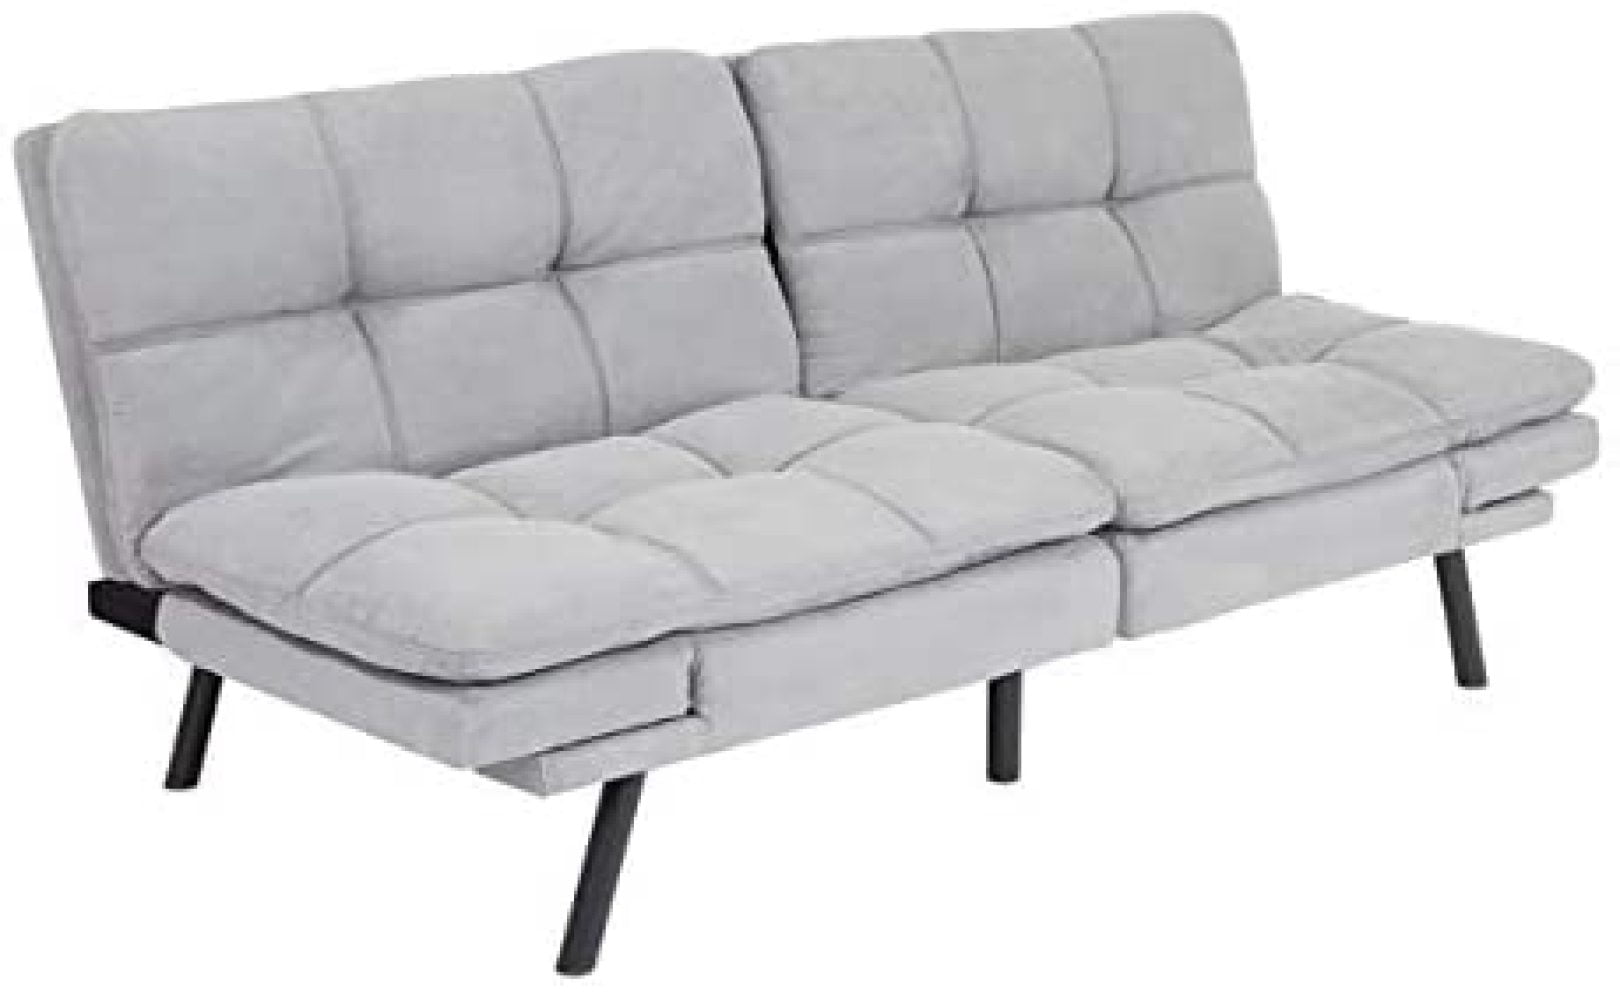 Memory Foam Futon Sofa Bed Couch Sleeper FULL Size Convertible Foldable Loveseat 